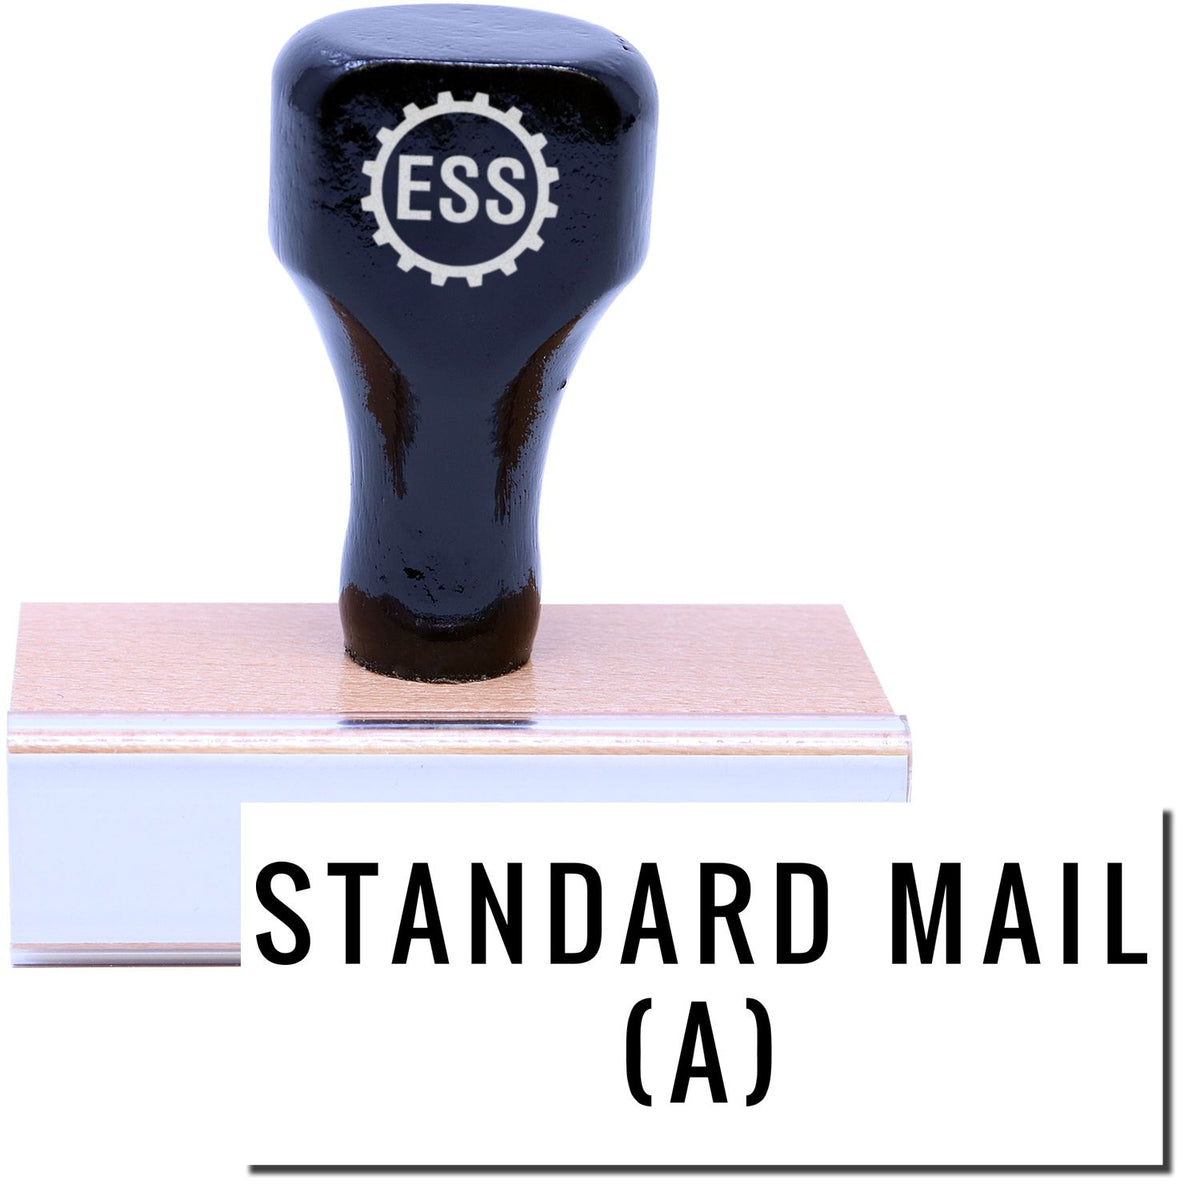 A stock office rubber stamp with a stamped image showing how the text &quot;STANDARD MAIL (A)&quot; in a large font is displayed after stamping.